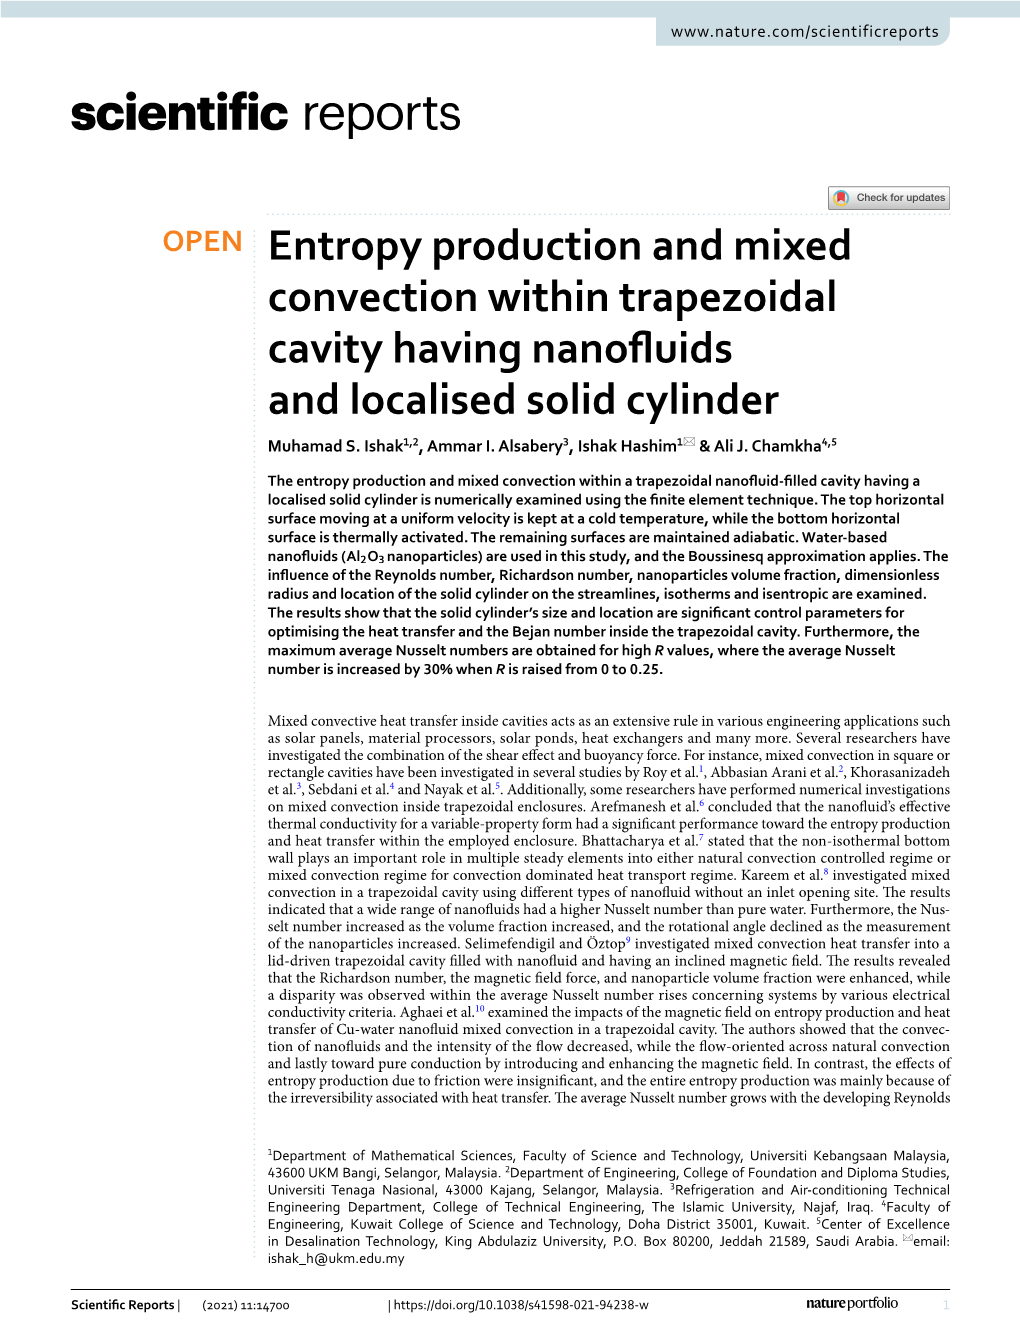 Entropy Production and Mixed Convection Within Trapezoidal Cavity Having Nanofuids and Localised Solid Cylinder Muhamad S